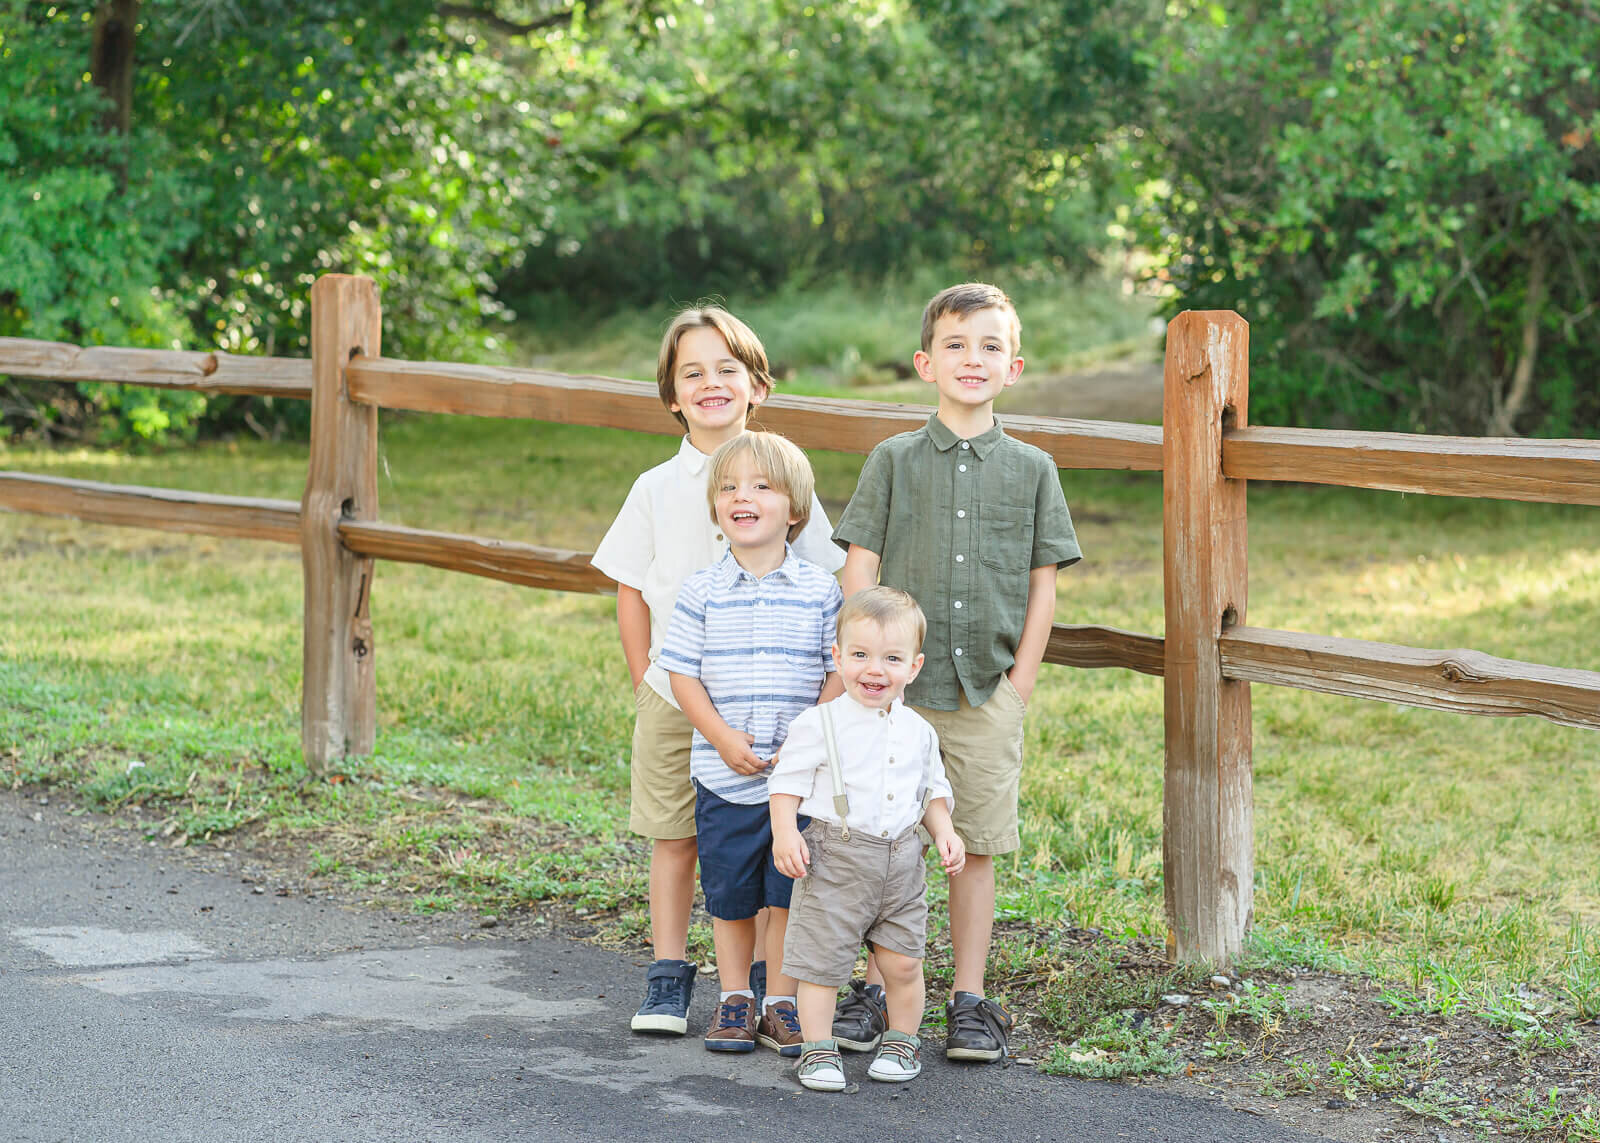 Four young boys standing in front of a wooden fence with sunlight filtering through the green oak trees in the background. Captured at Highland Glen Park.